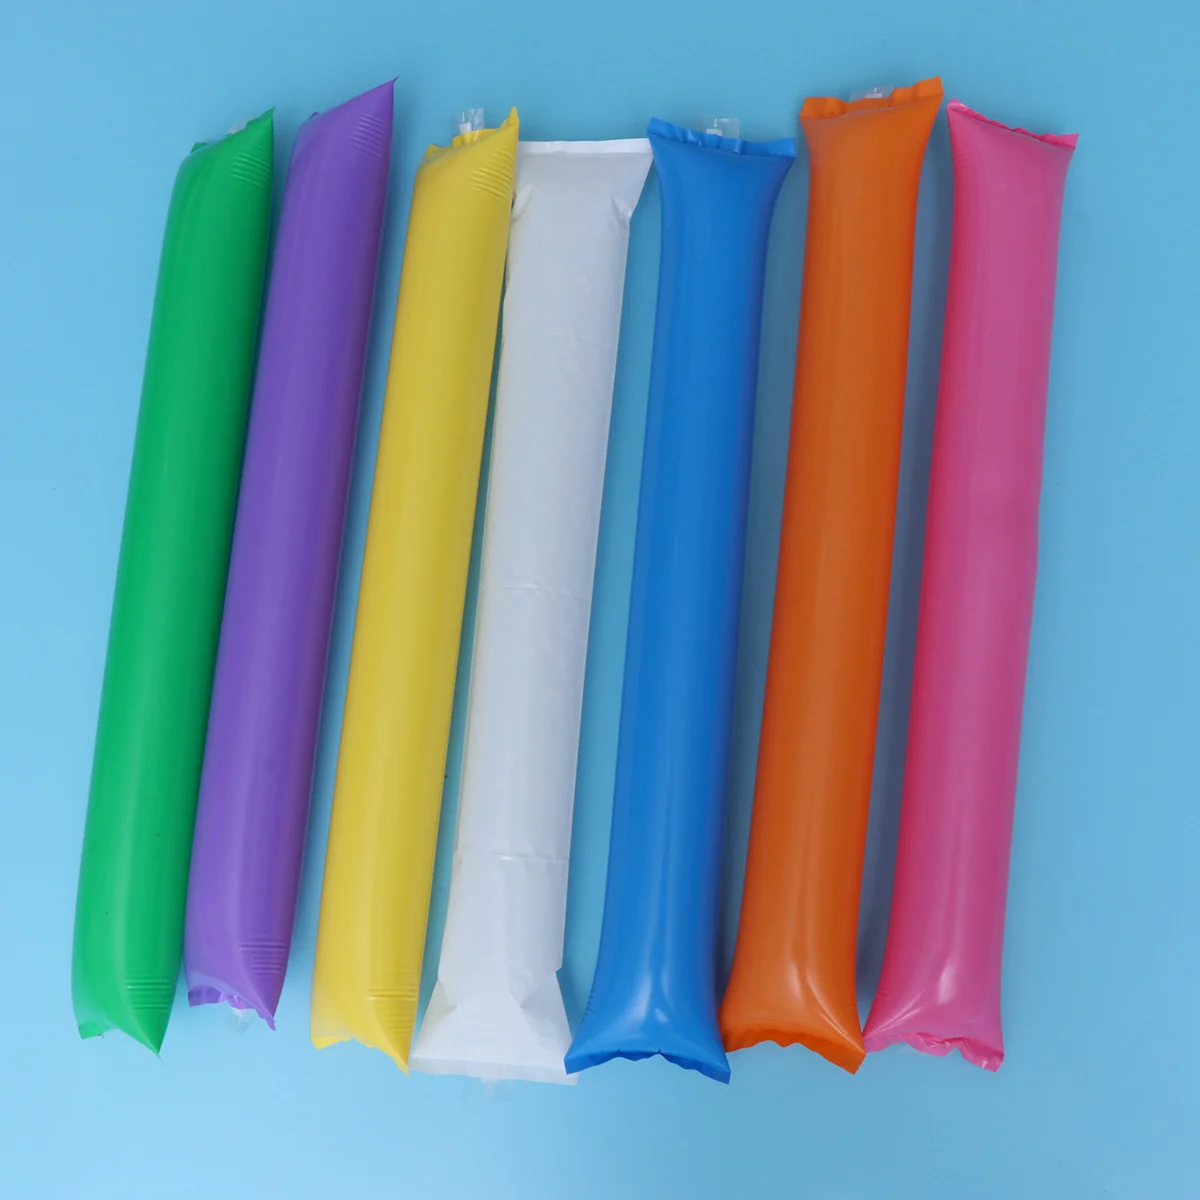 

Sticks Bam Noisemakers Cheer Inflatable Thunder Sporting Bar Blow Balloon Stadium Makers Noise Outfit Hands Clap Color Cheering